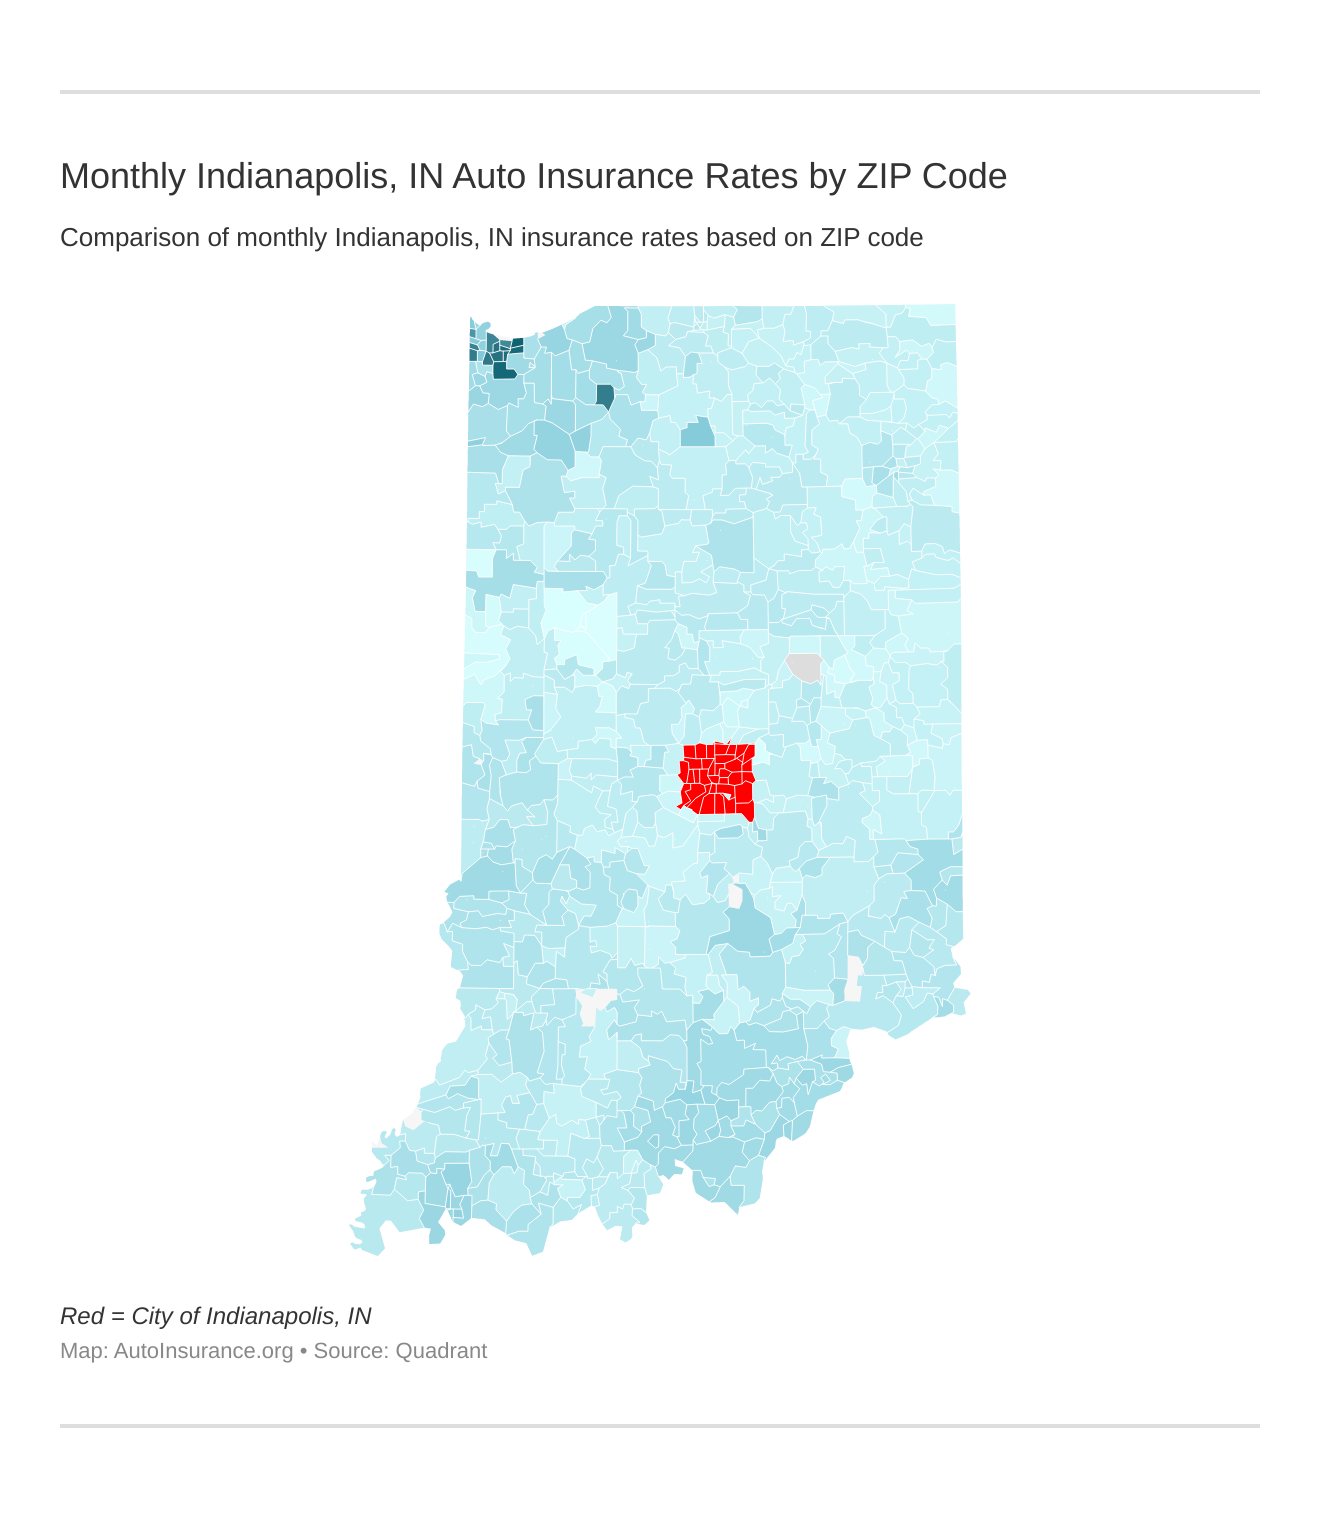 Monthly Indianapolis, IN Auto Insurance Rates by ZIP Code